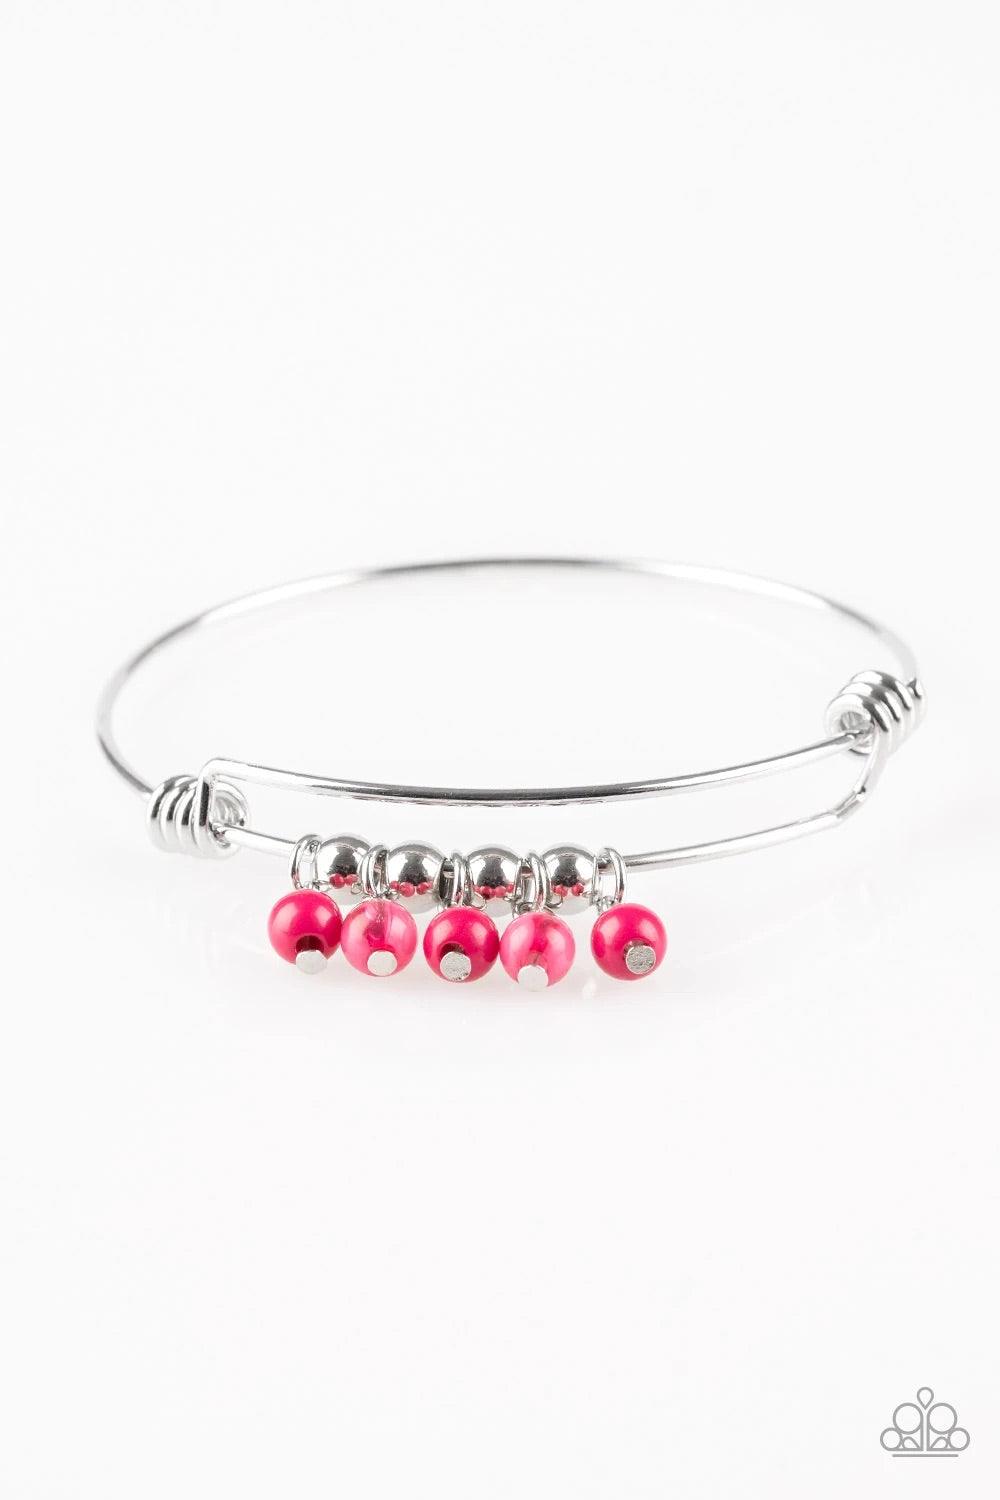 Paparazzi Accessories All Roads Lead to ROAM - Pink Silver wire coils around the wrist, creating an adjustable-like bangle. Glassy pink beads slide between two wire wrap fittings, creating colorful accents along the wrist. Sold as one individual bracelet.